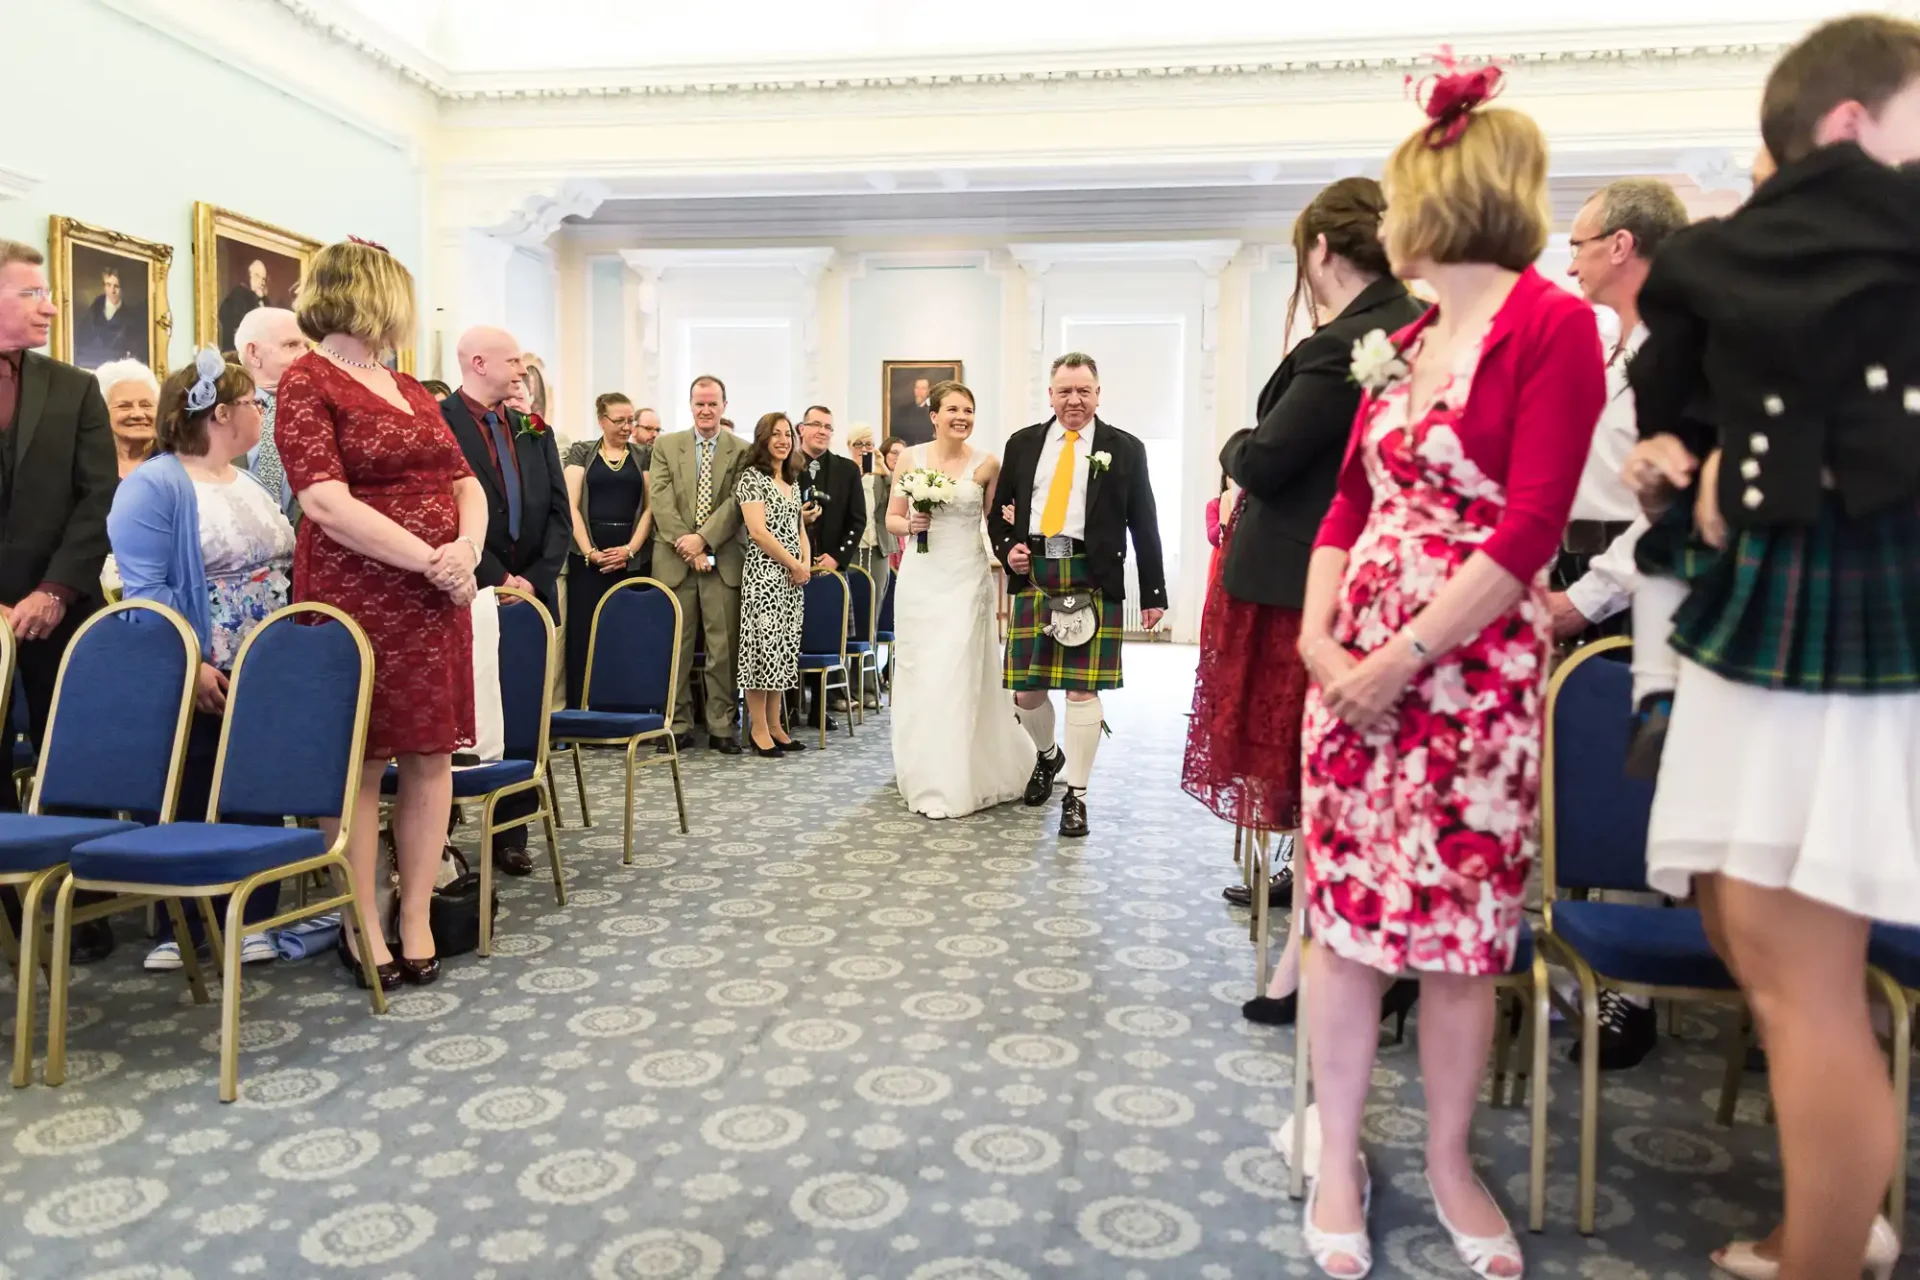 Bride and groom walk down the aisle, surrounded by guests, in a room with blue chairs and ornate carpet. the groom wears a kilt.